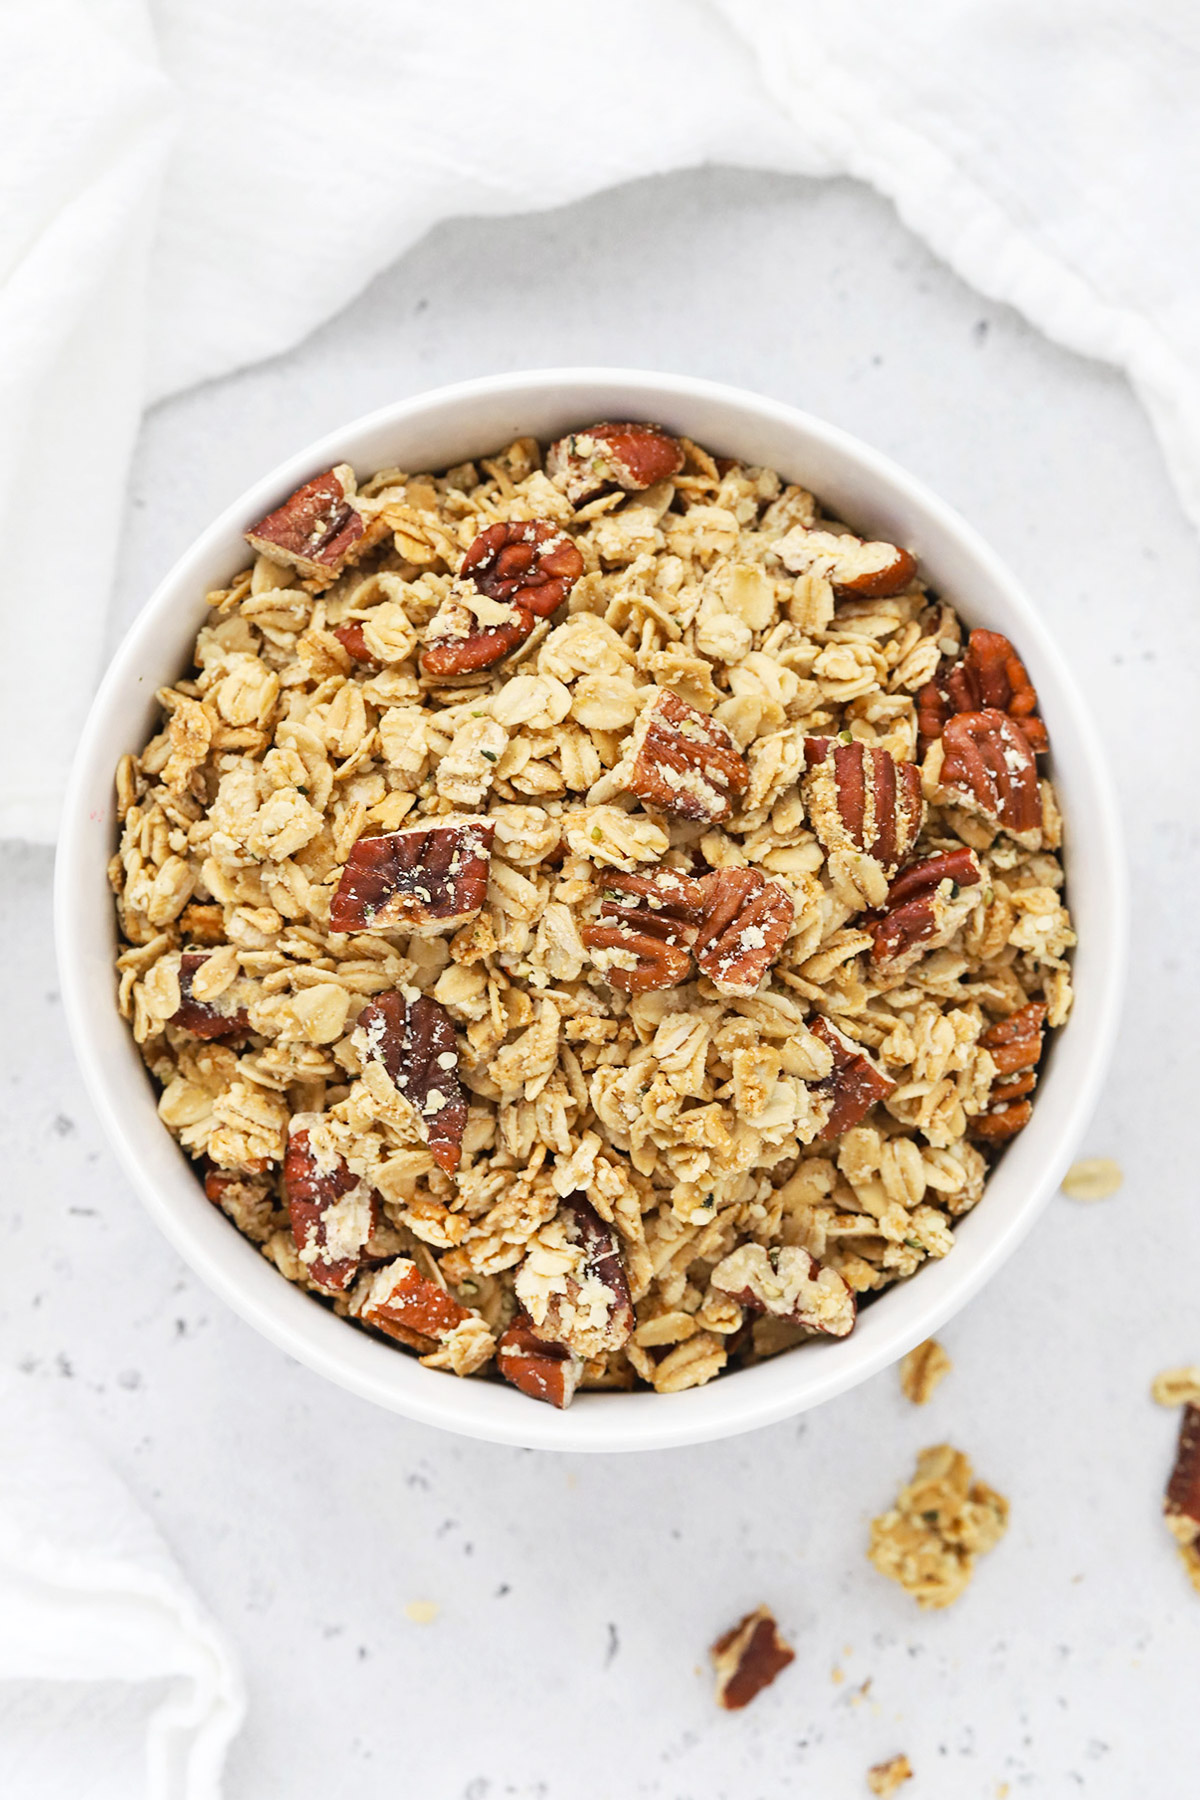 Overhead view of a bowl of homemade maple pecan granola